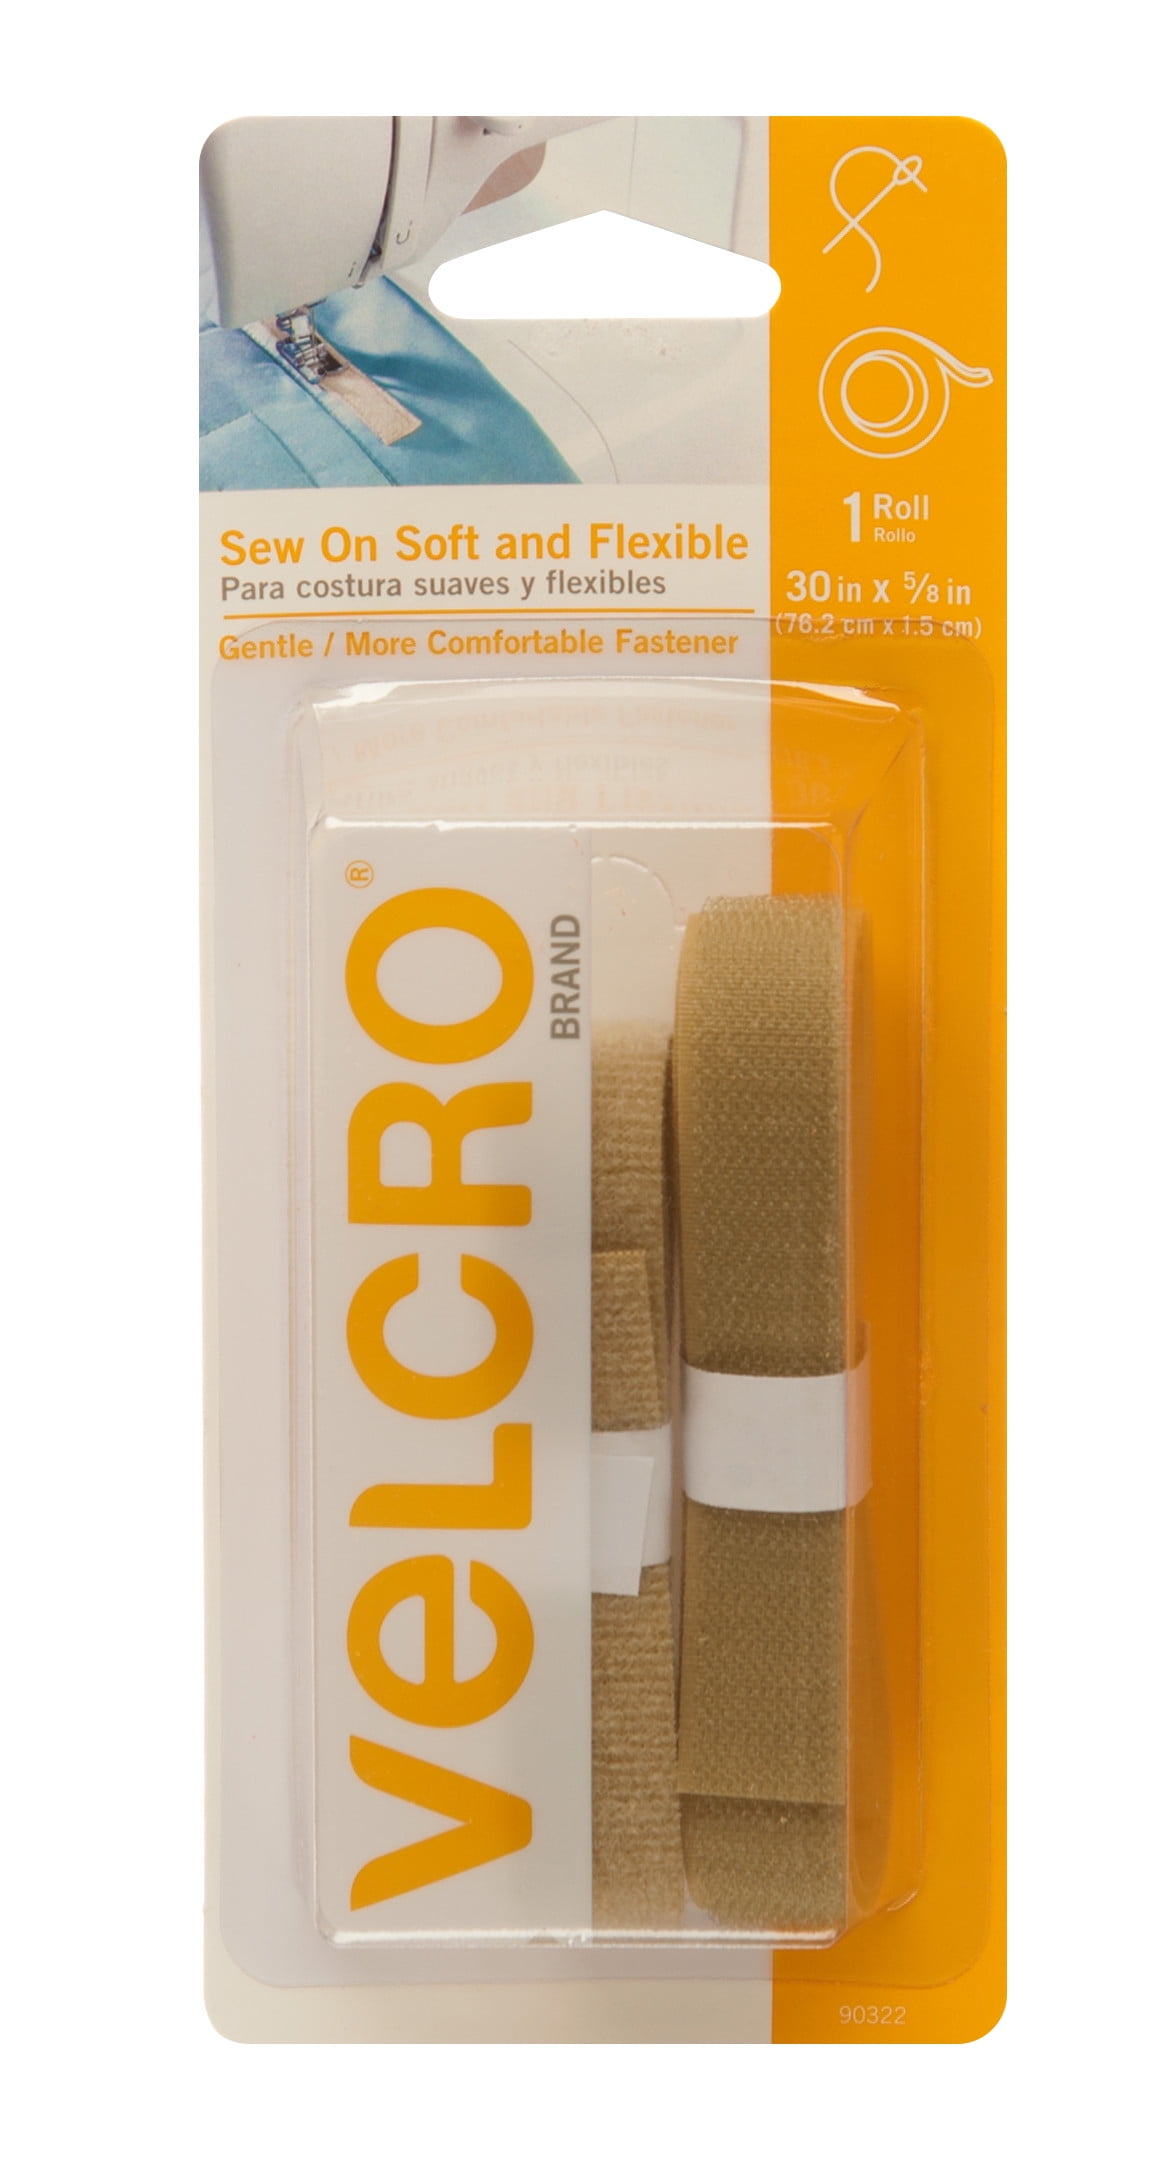  VELCRO Brand For Fabrics, Sew On Fabric Tape for Alterations  and Hemming, No Ironing or Gluing, Ideal Substitute for Snaps and Buttons